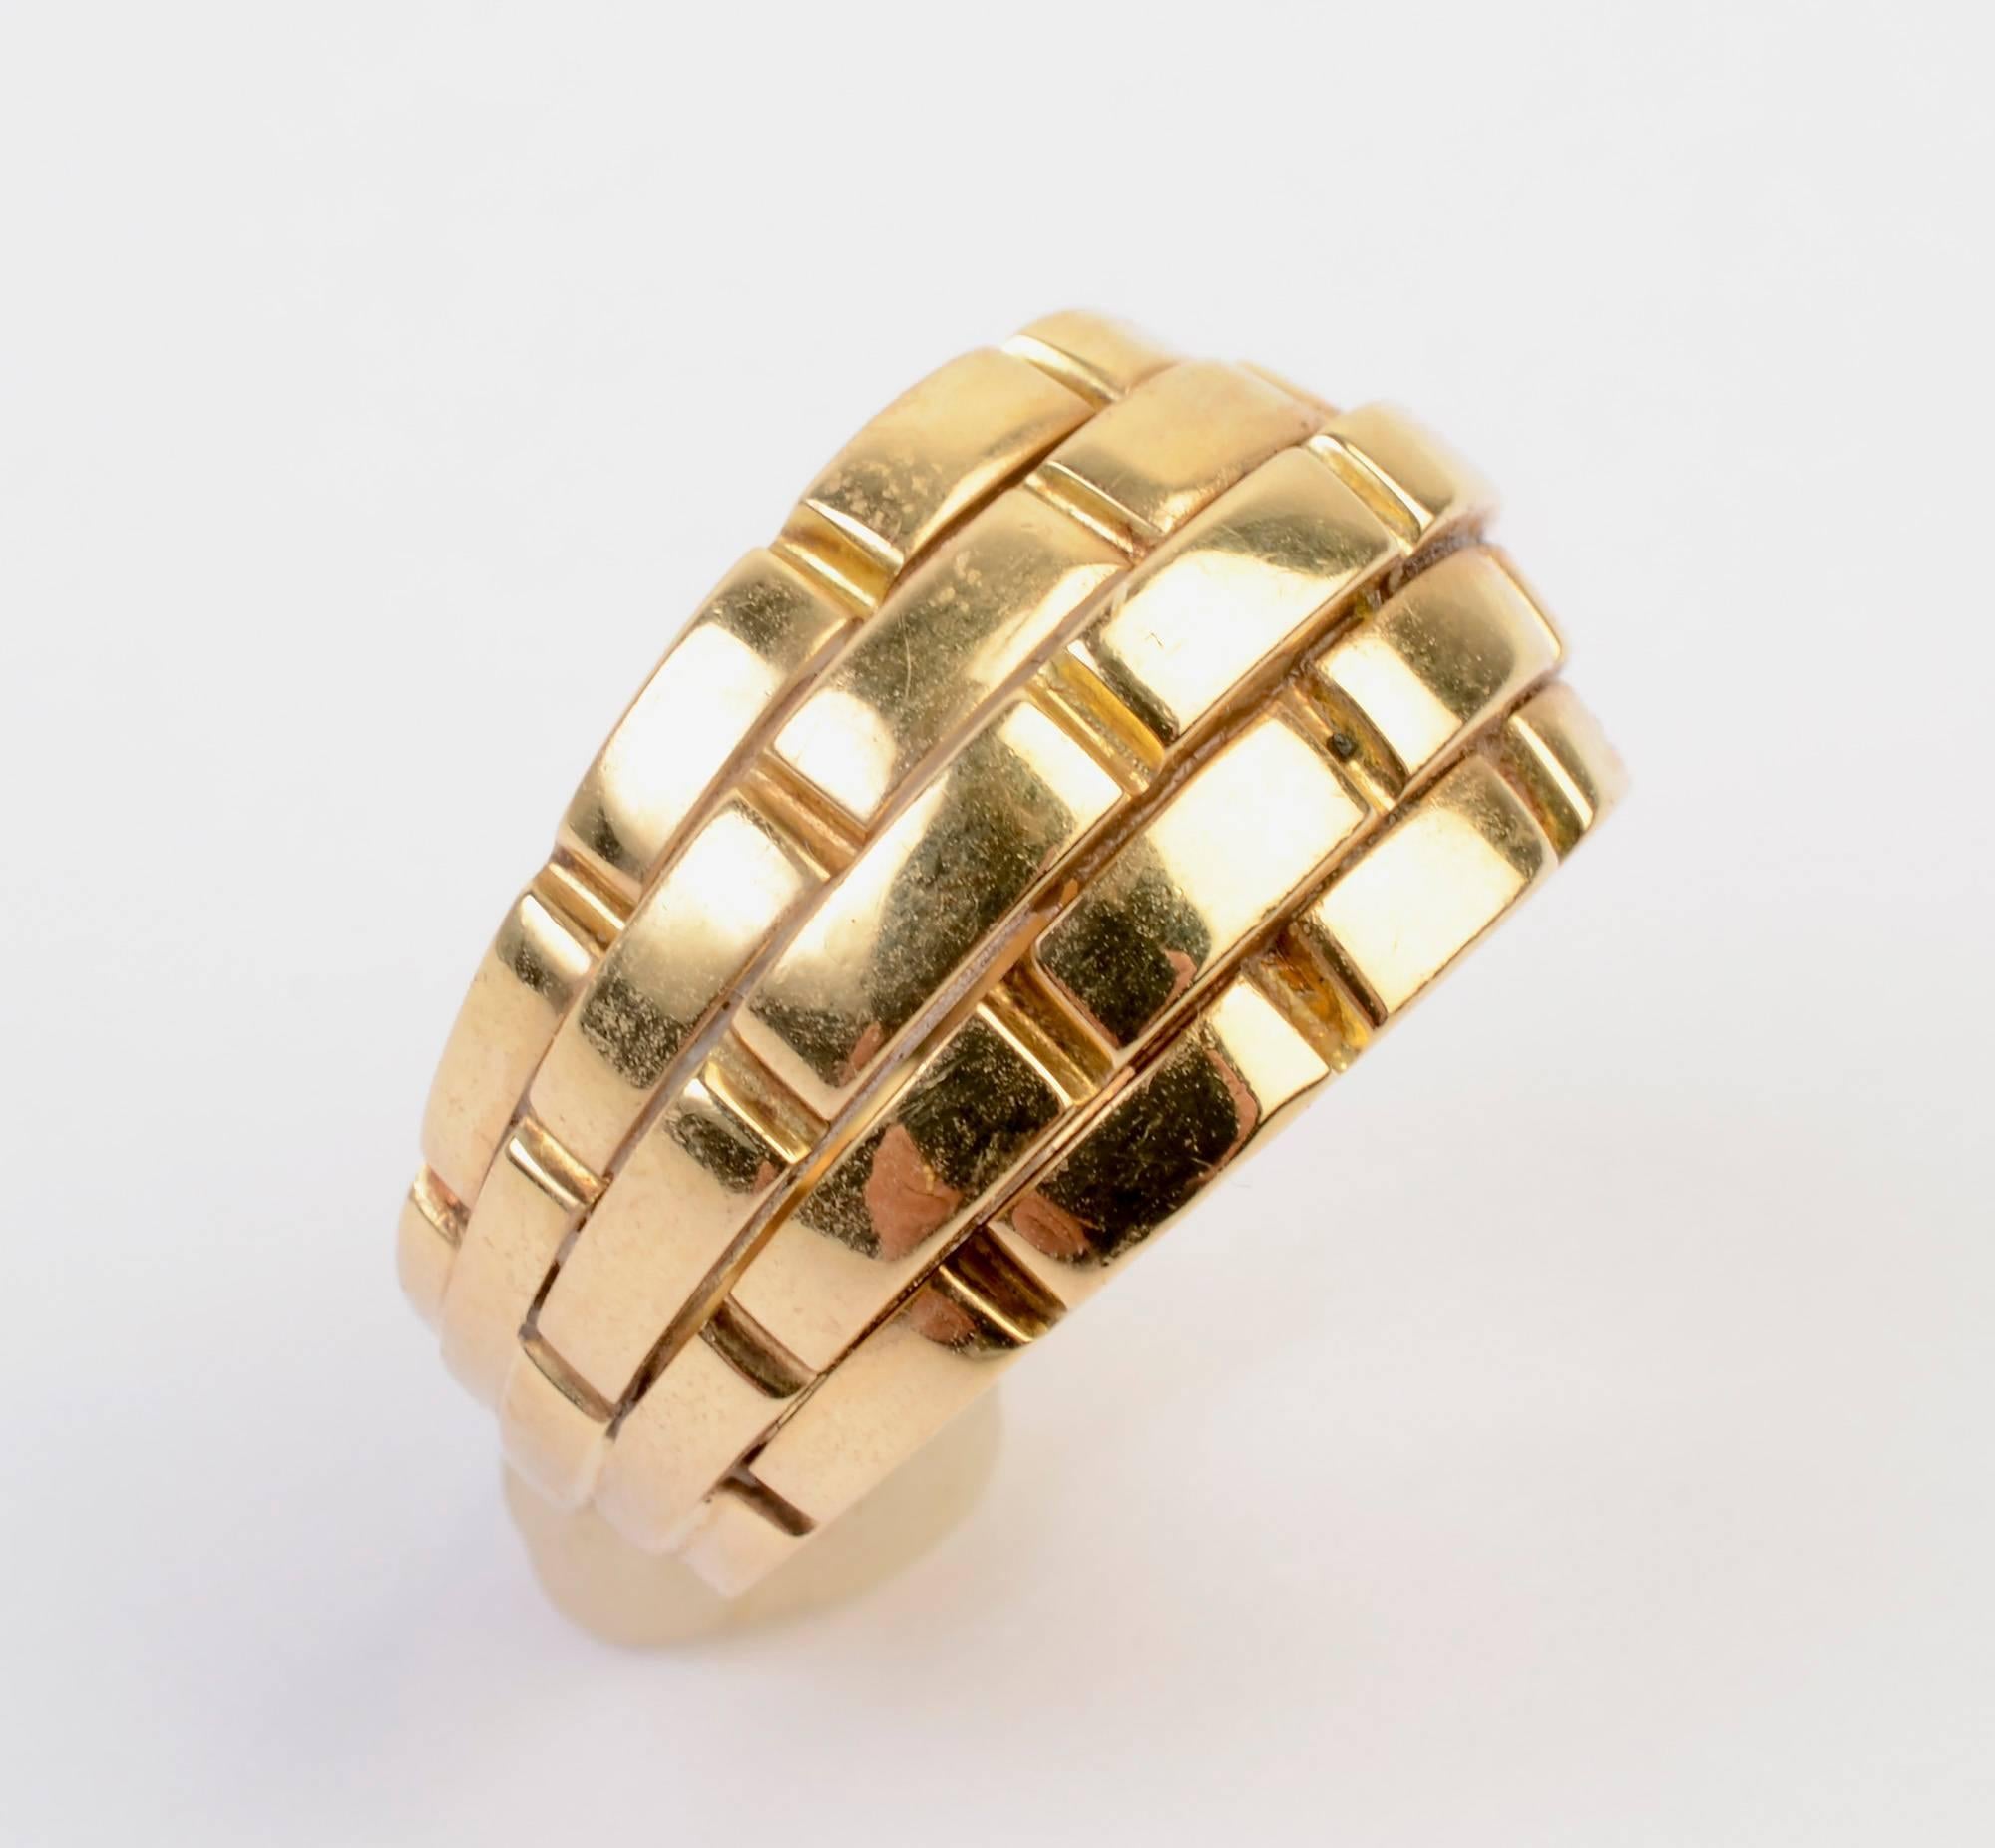 Cartier Maillon Panthere gold domed ring with a brickwork design. The ring is size 6 or 52 in Cartier measurements. It is 5/8 